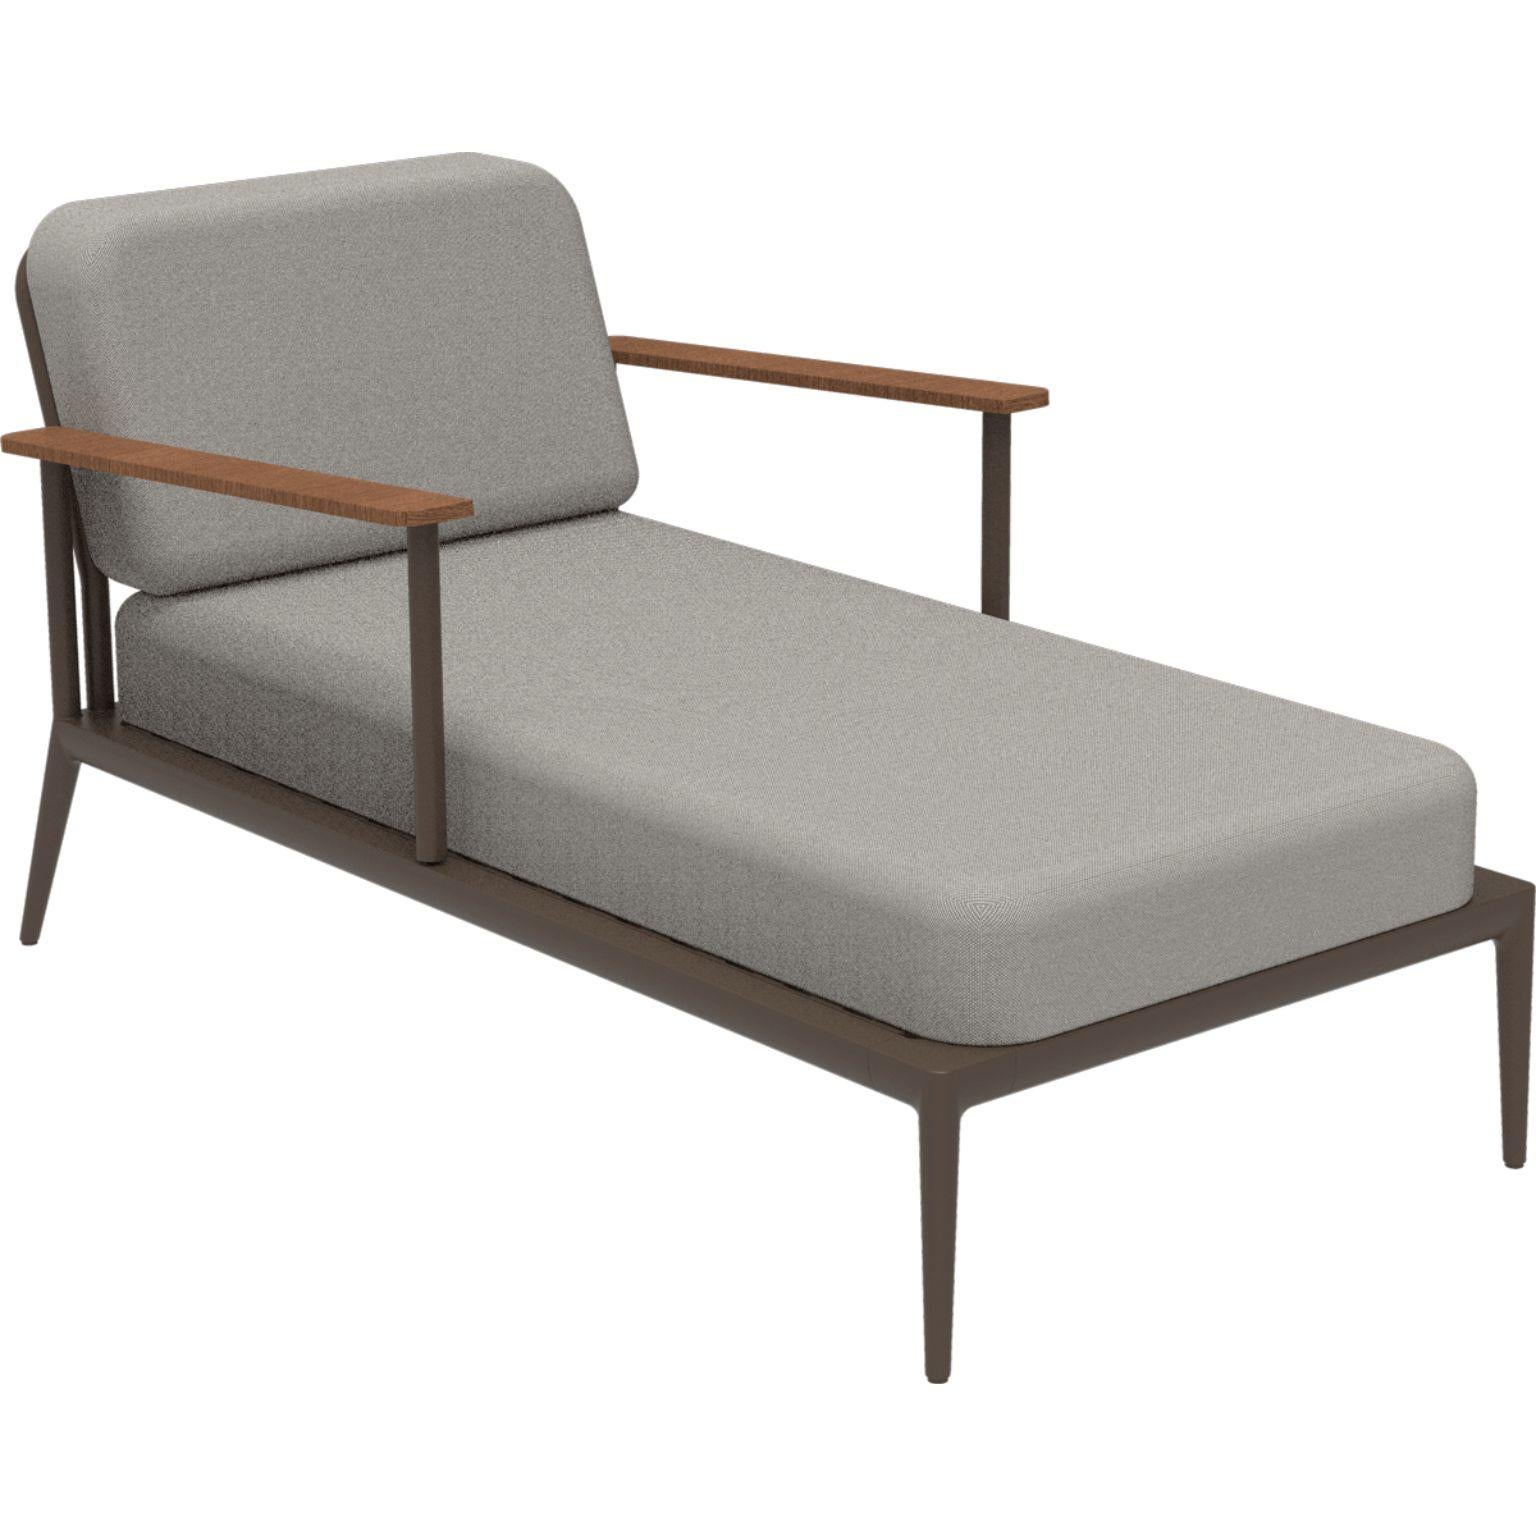 Nature Bronze Divan by MOWEE
Dimensions: D155 x W83 x H81 cm (seat height 42 cm).
Material: Aluminum, upholstery and Iroko wood.
Weight: 30 kg.
Also available in different colors and finishes. Please contact us.

An unmistakable collection for